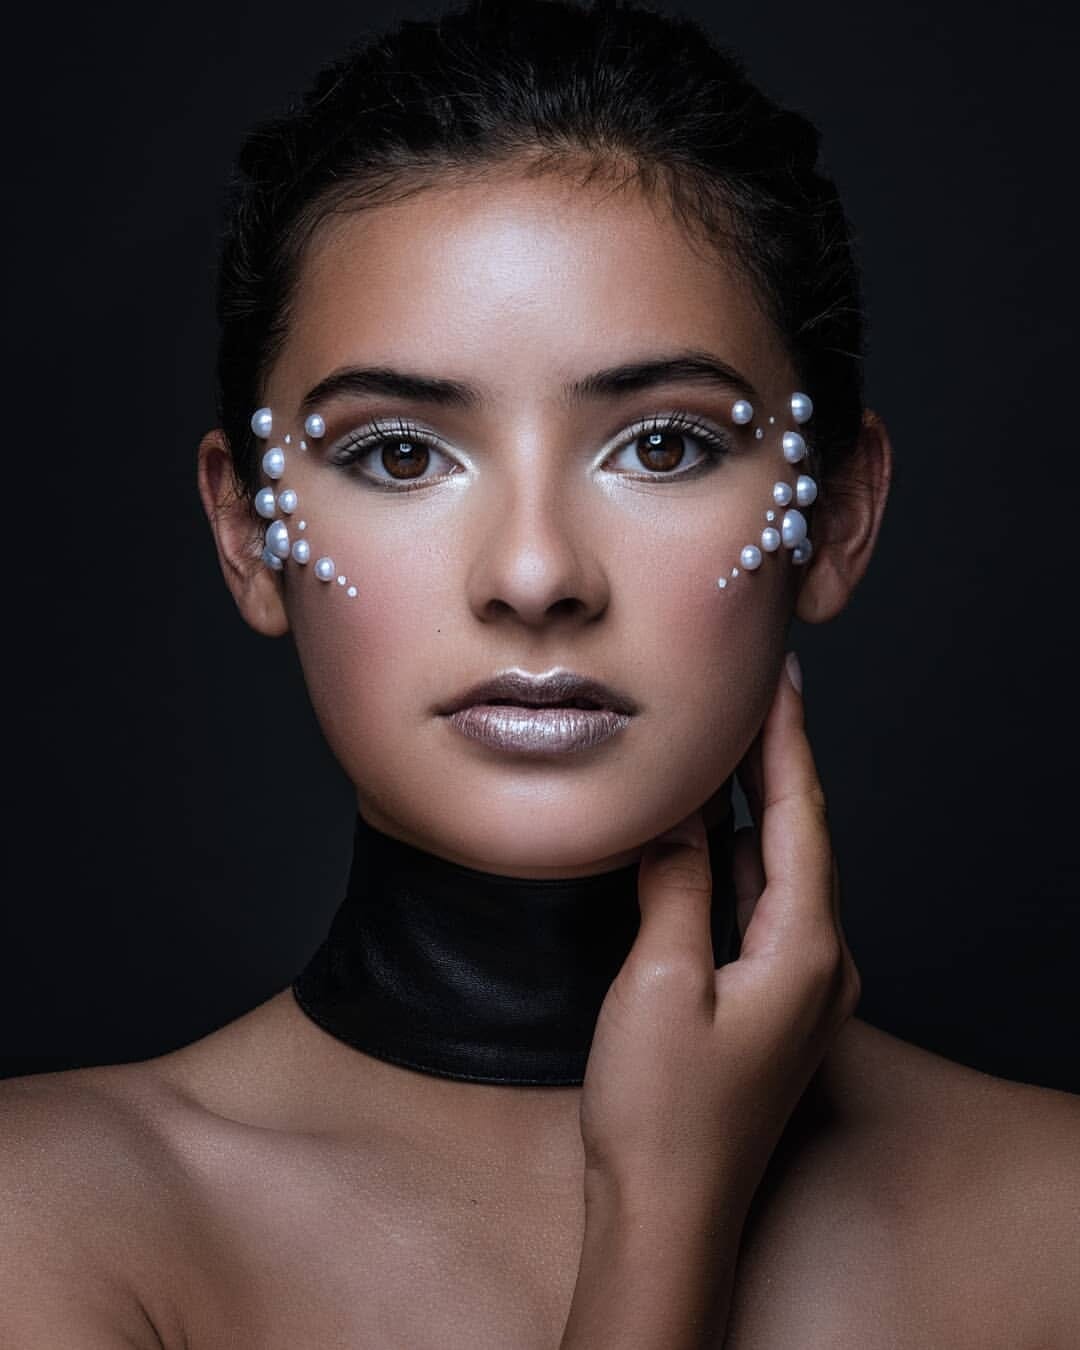 Discover stunning silver makeup looks for a touch of elegance. Explore step-by-step tutorials and inspiration for your next glamorous makeover.